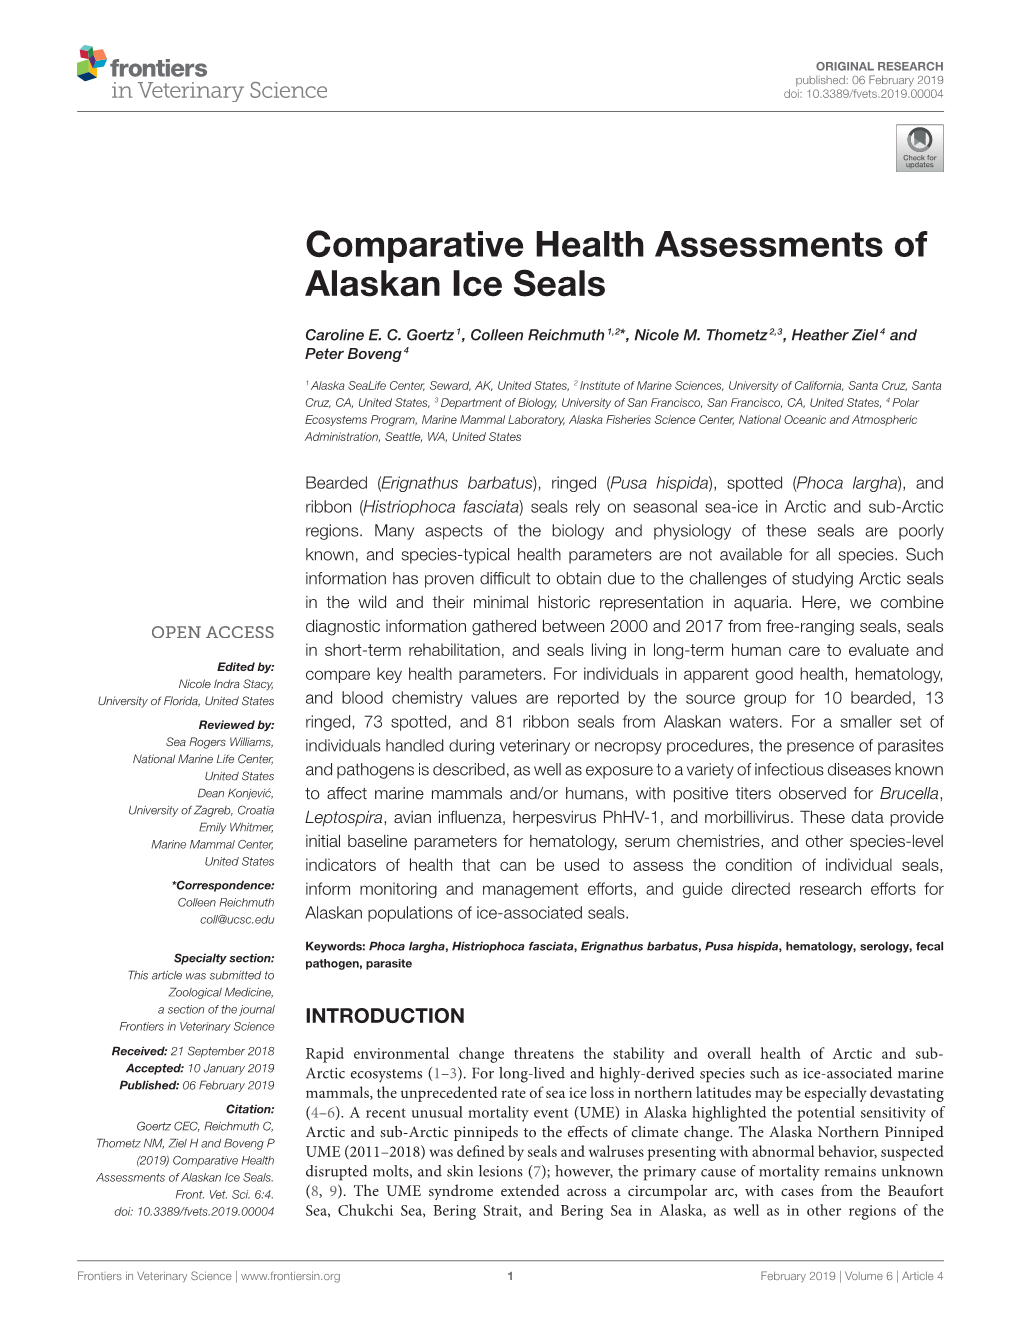 Comparative Health Assessments of Alaskan Ice Seals